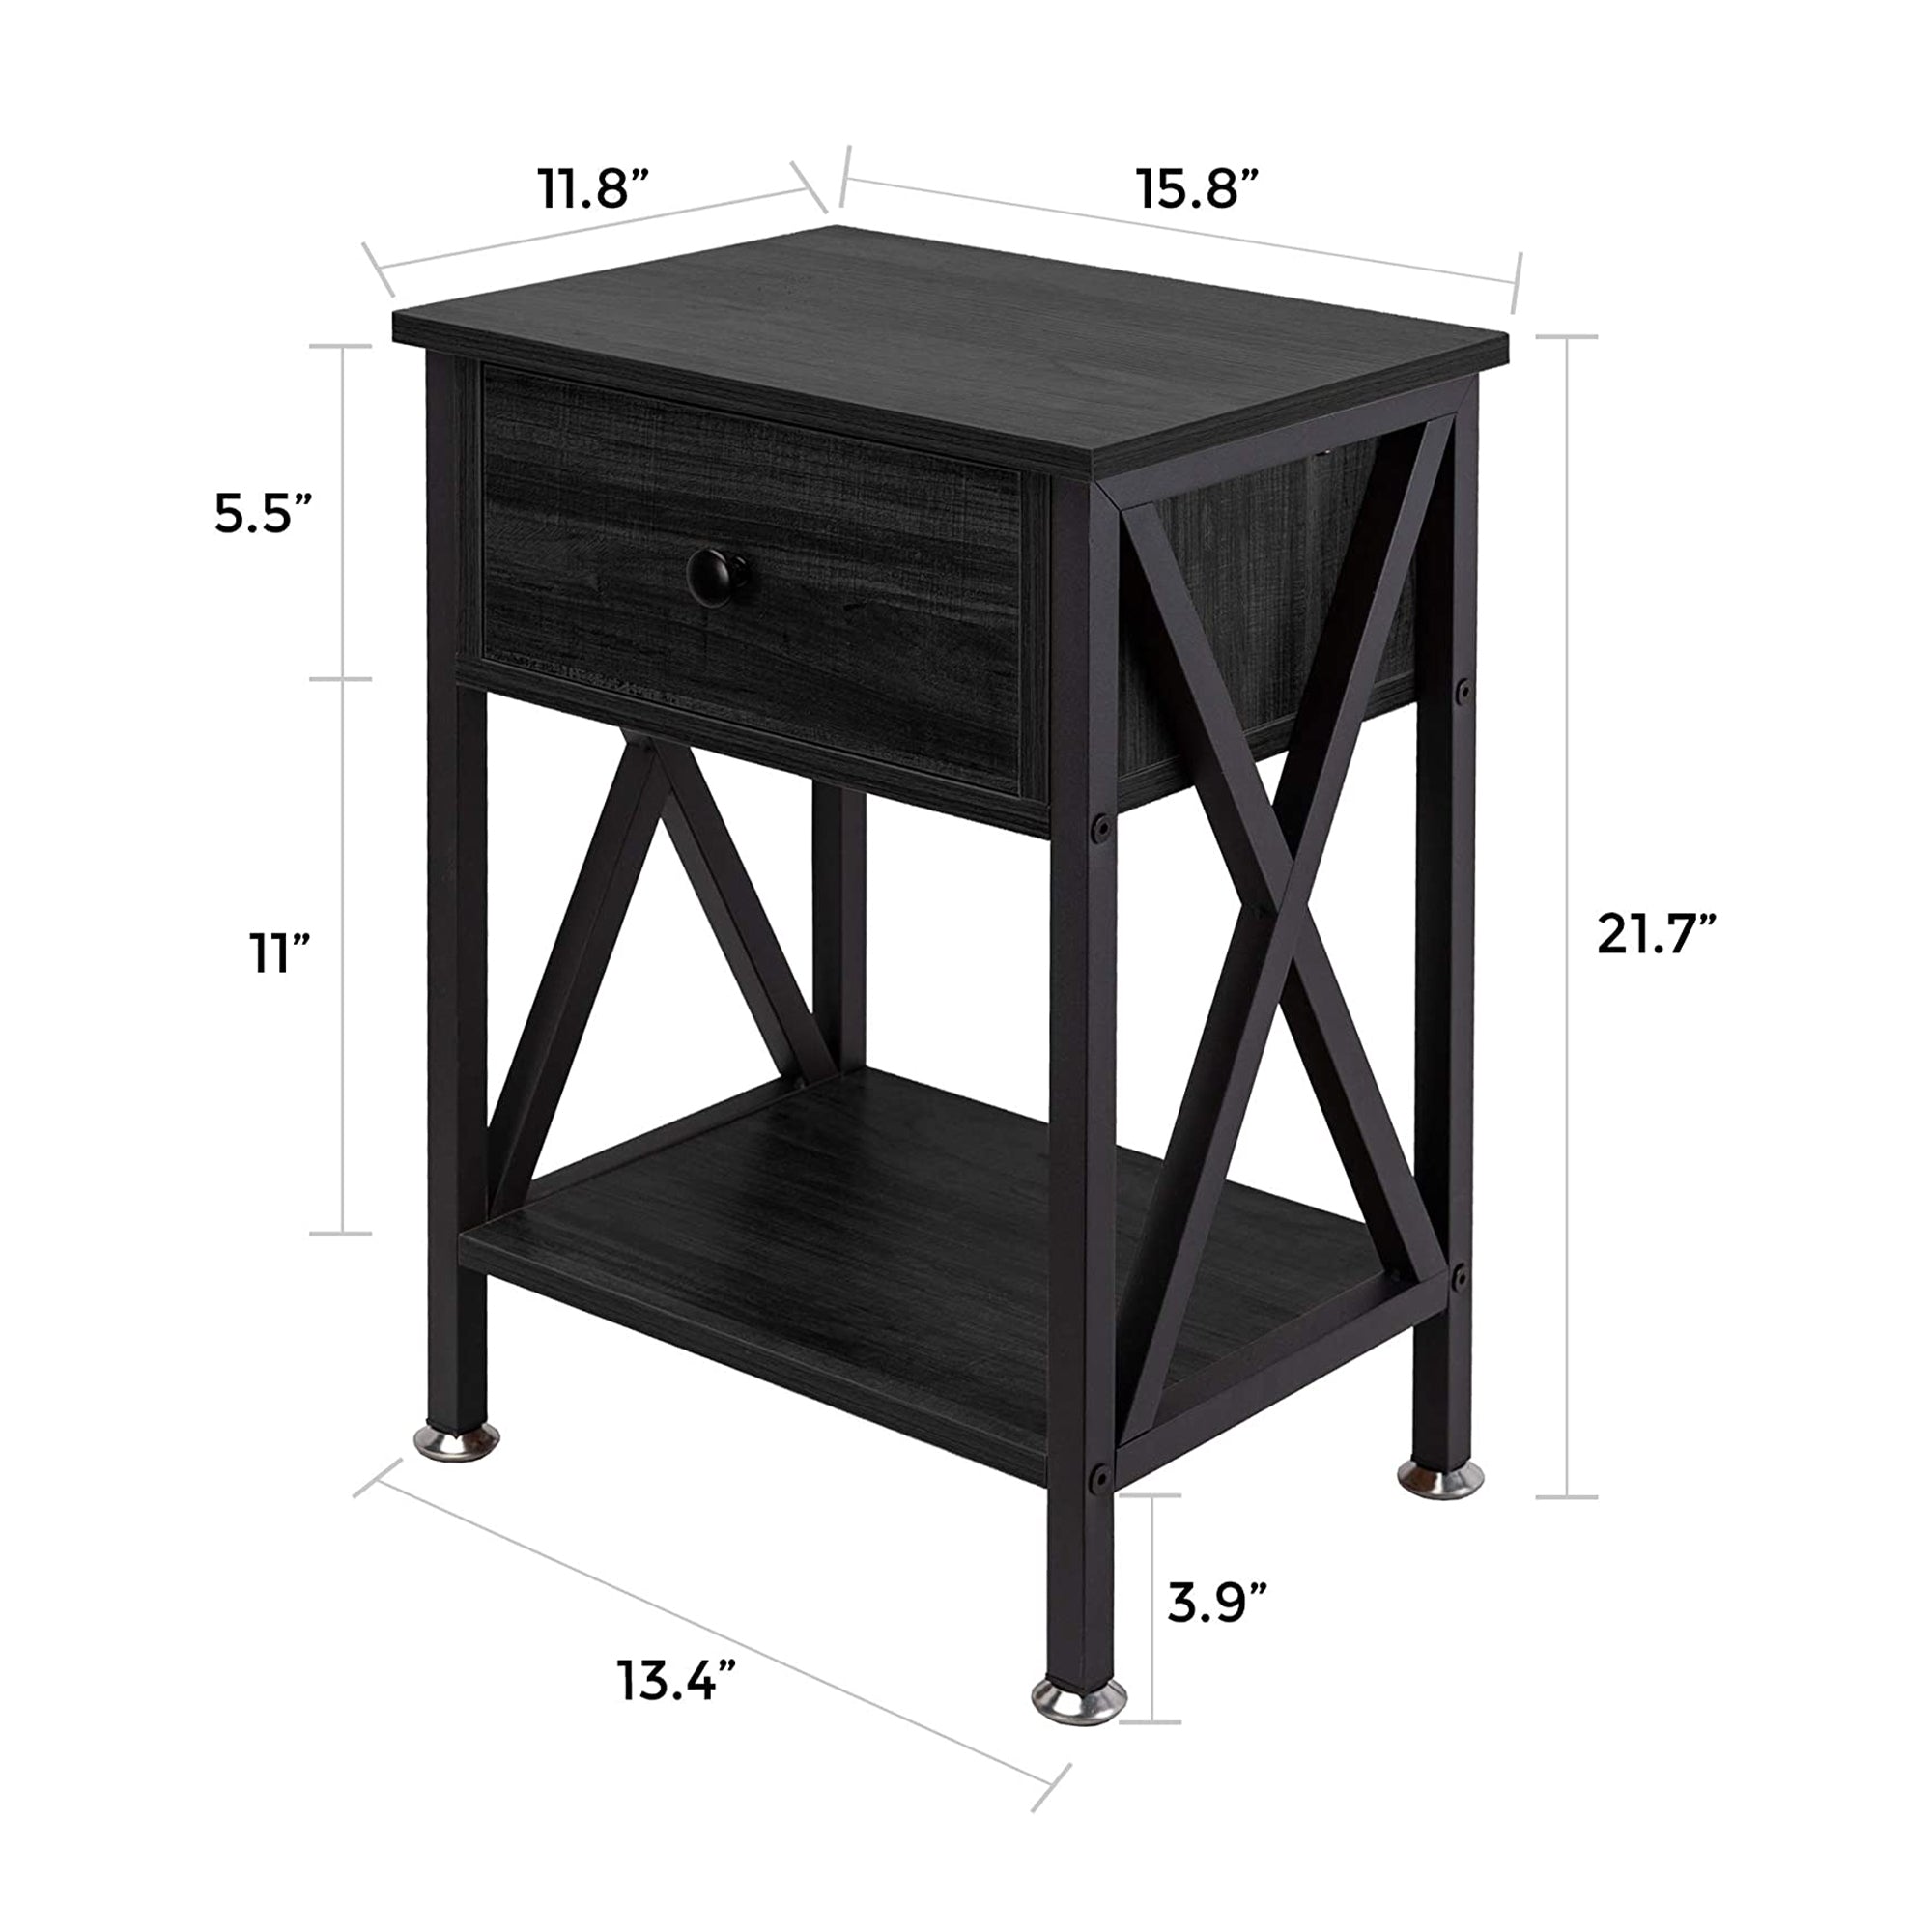 Nightstand with Drawer and Open Storage Shelves, Bedside End Table for Bedroom Living Room, Black